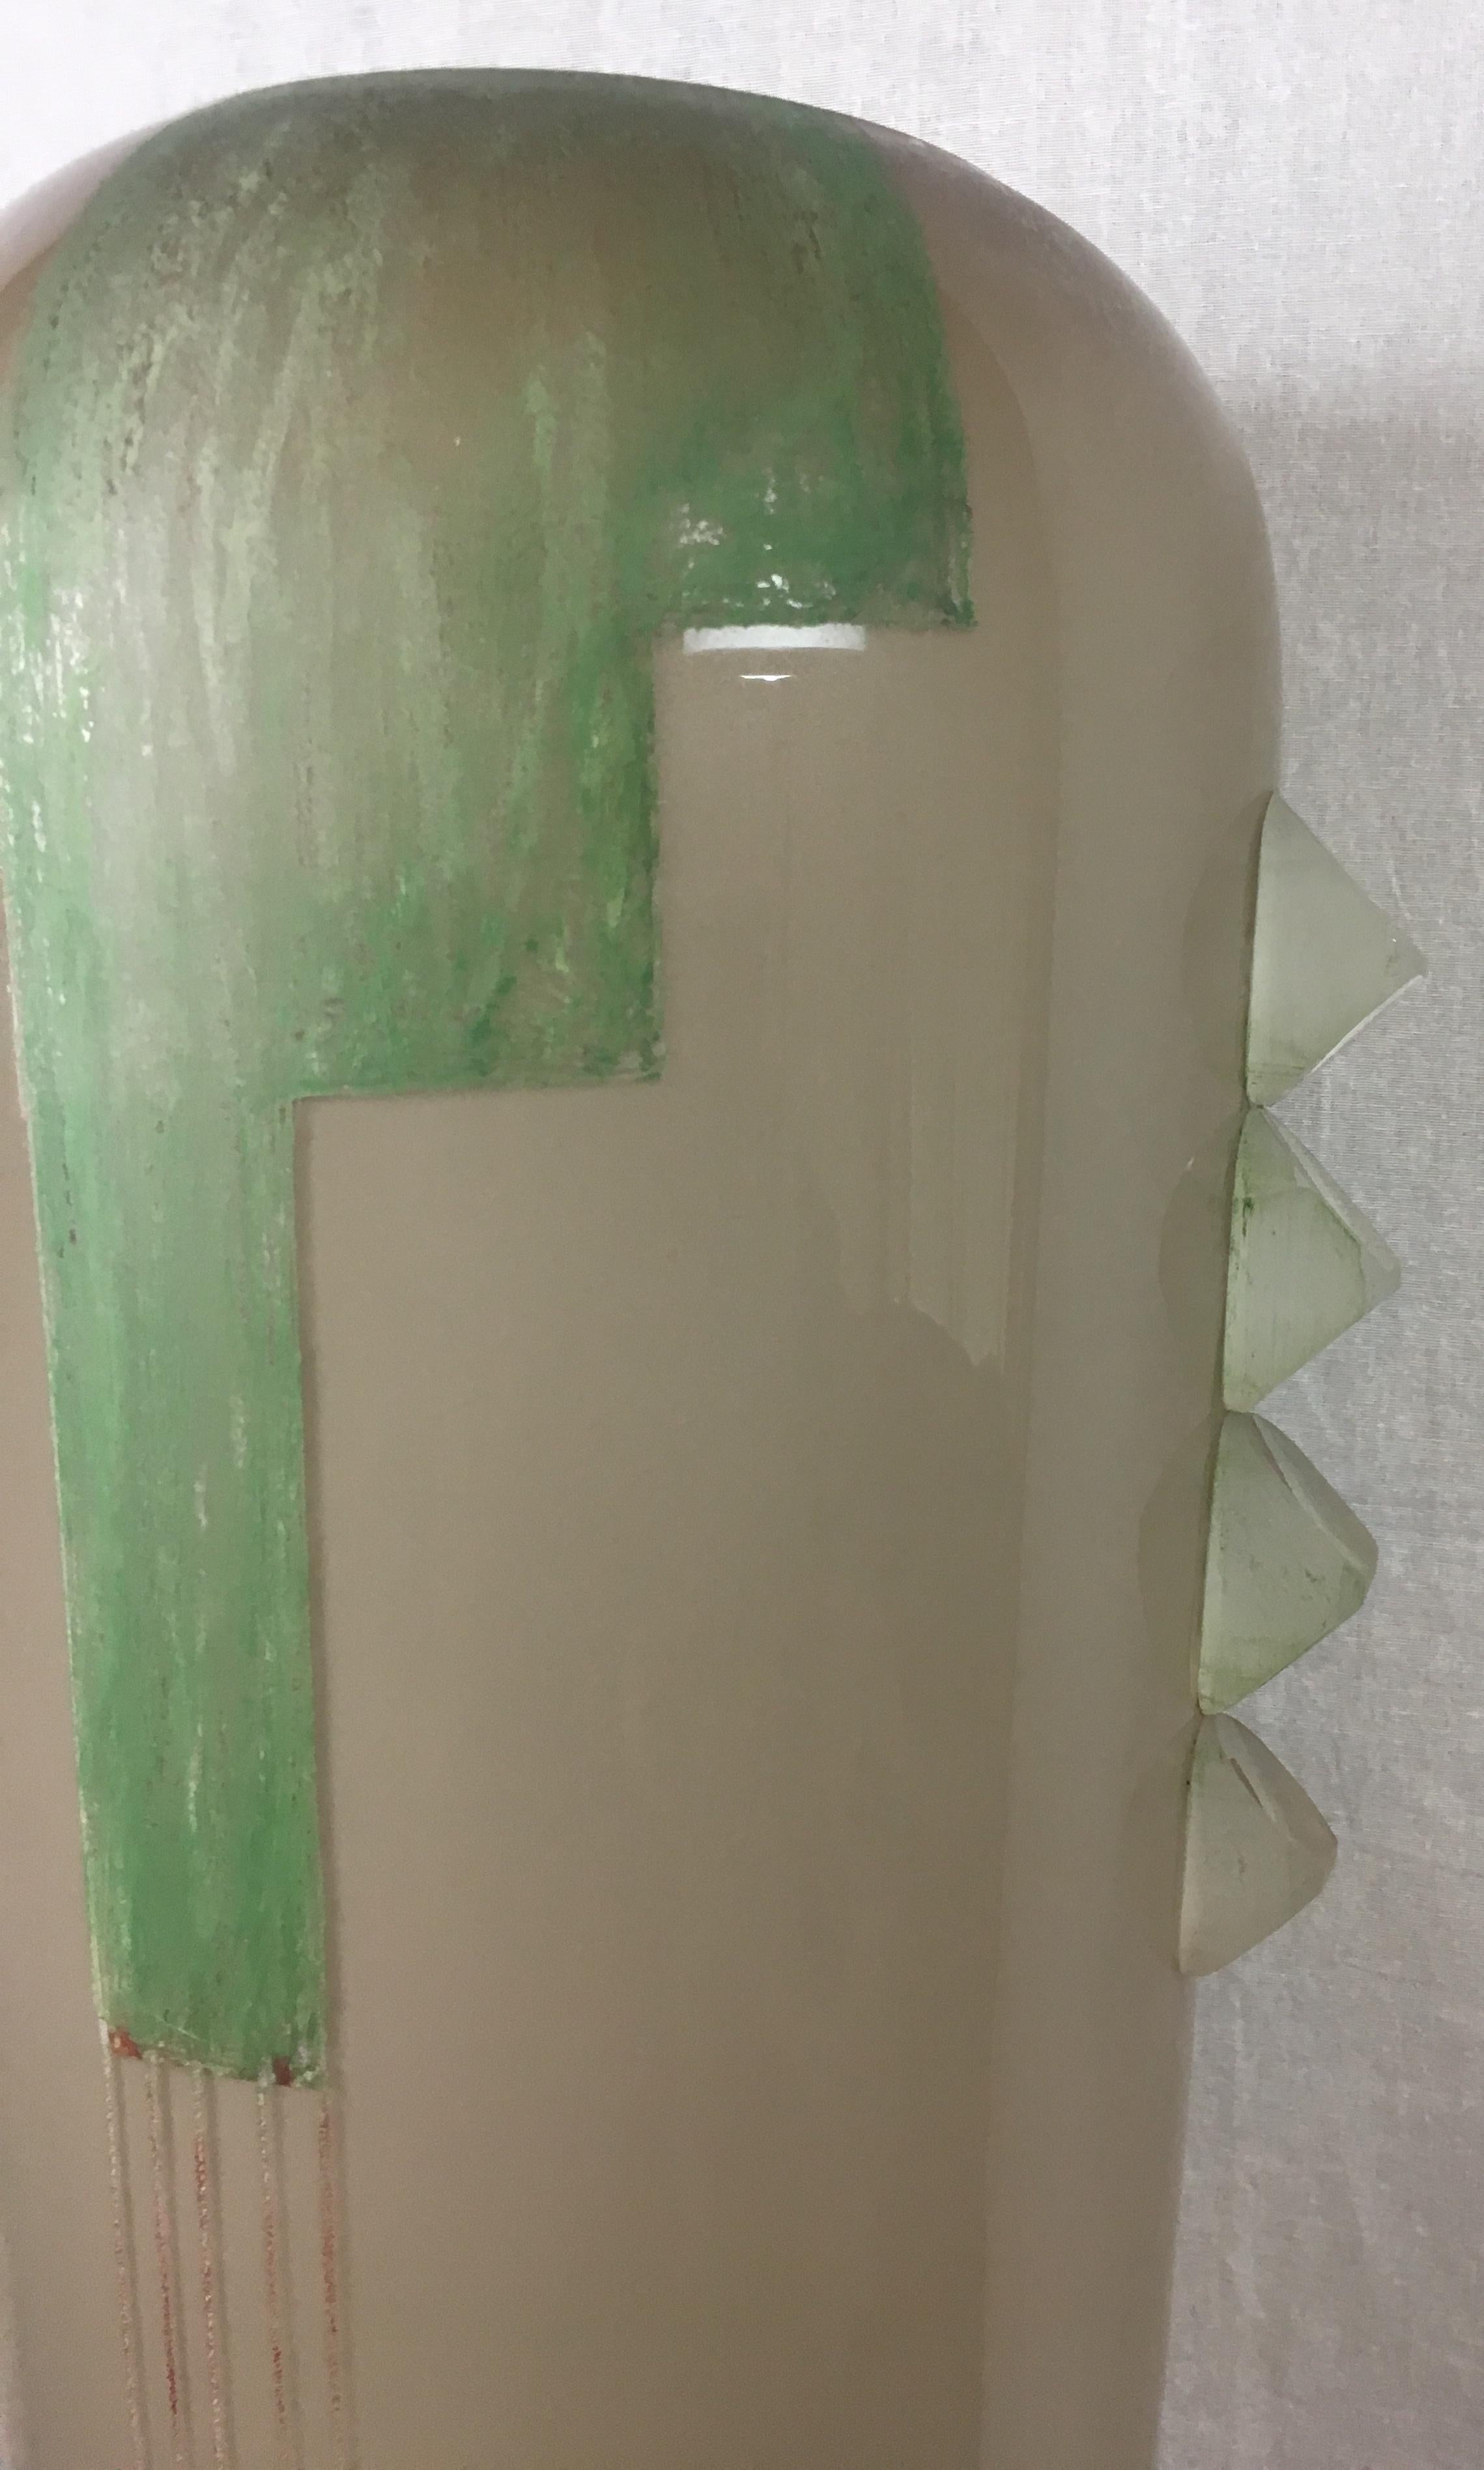 French Art Deco Cubist Glass Floor Vase by Anatole Riecke, from La Coupole Brasserie For Sale